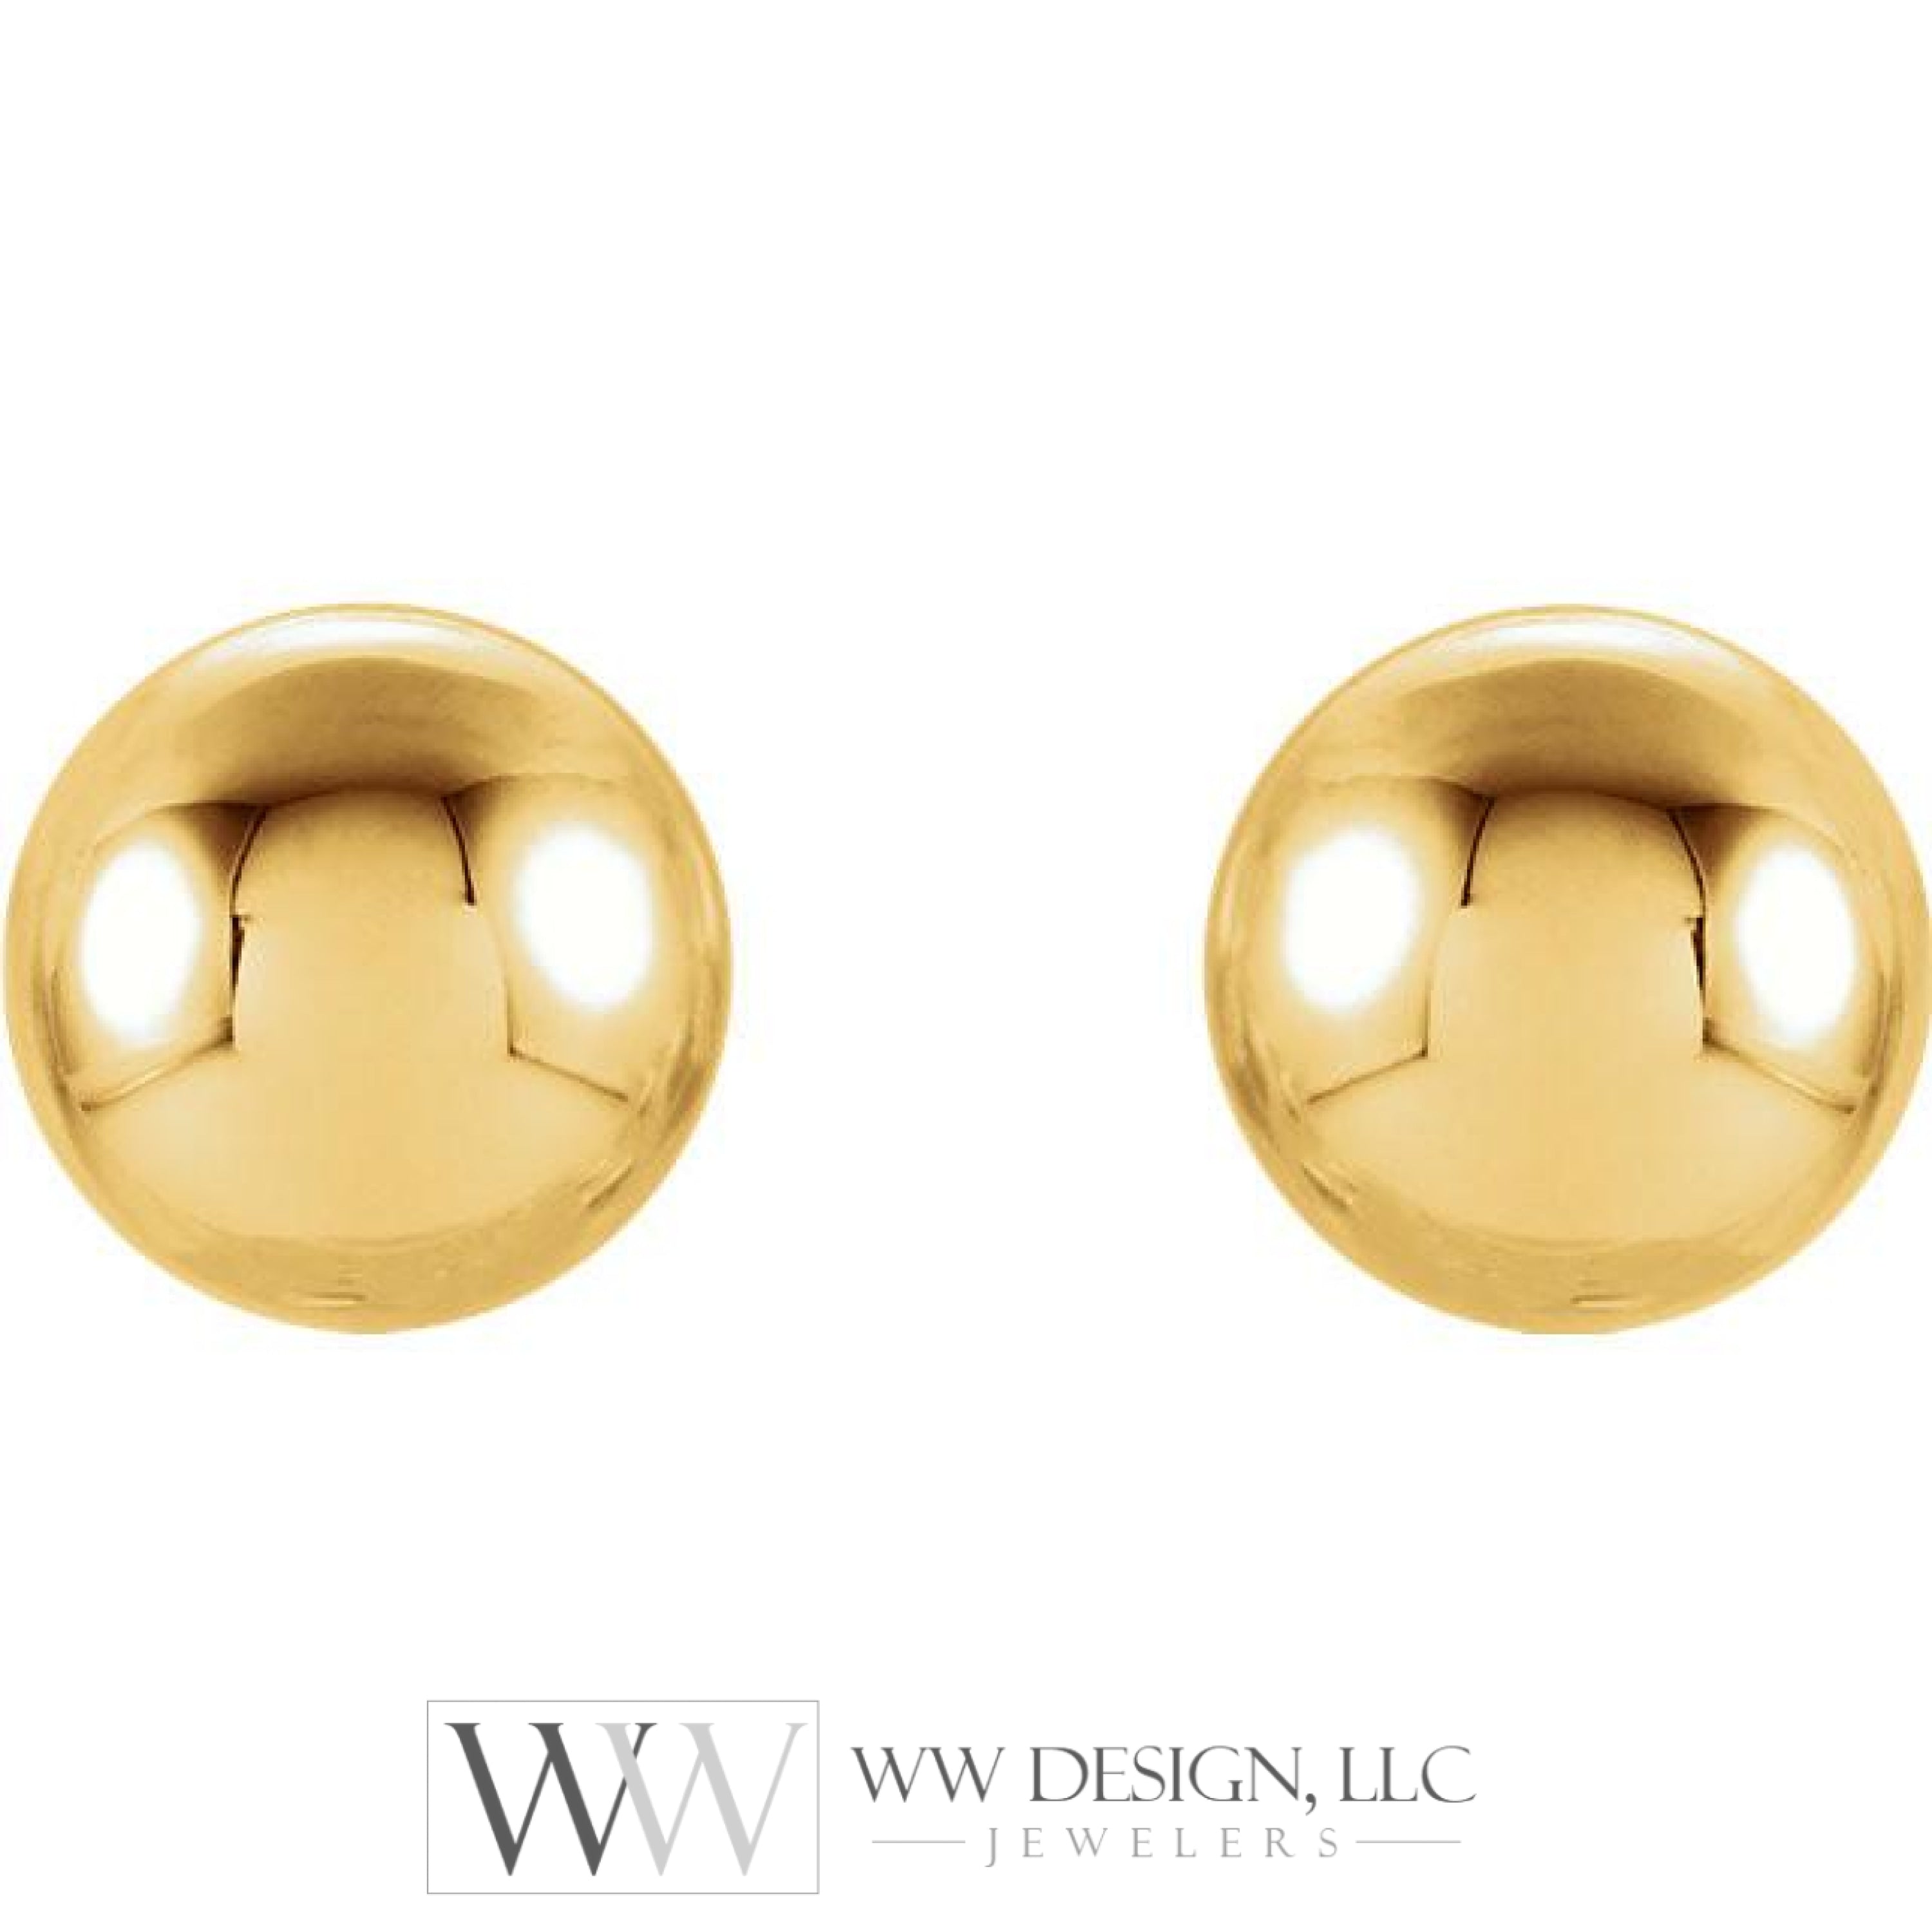 4mm Ball Earrings with Bright Finish - 14K Gold (Yellow or White)